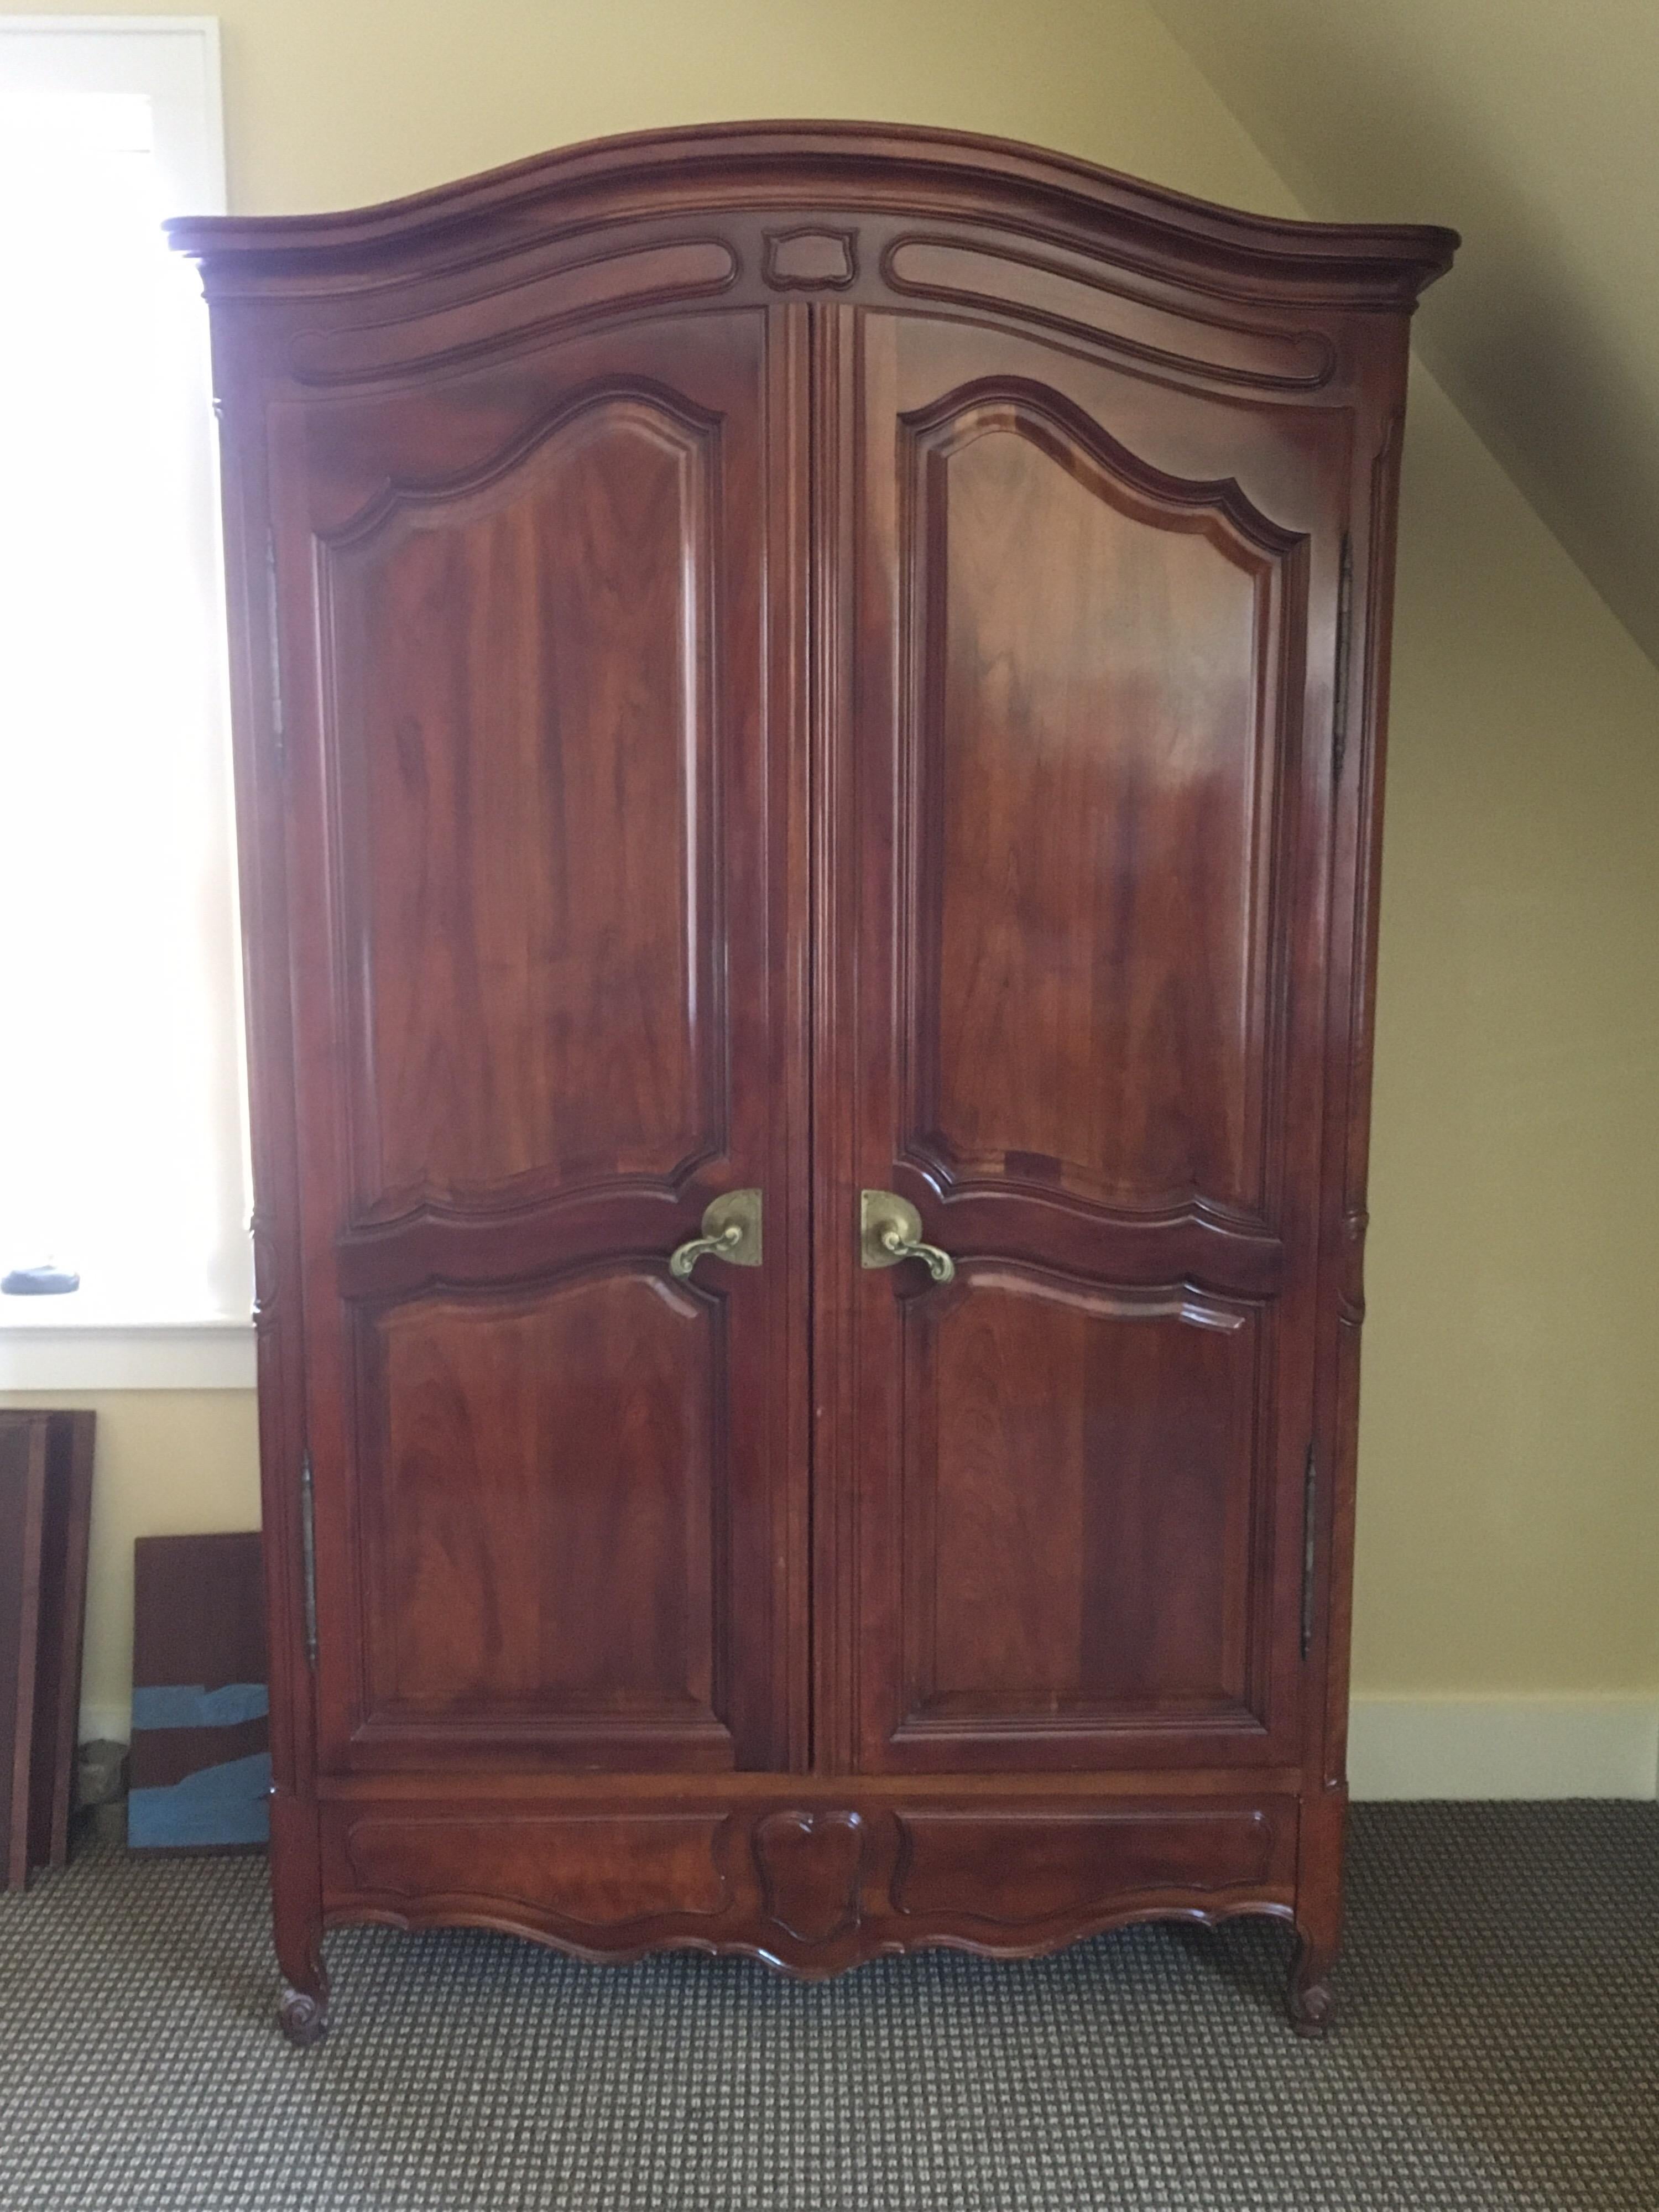 20th century French Provincial style walnut armoire by John Widdicomb, marked with plaque.
Behind two doors:
Upper area is fitted with rail to hold hanging clothes.
Plus two adjustable shelves 18.25